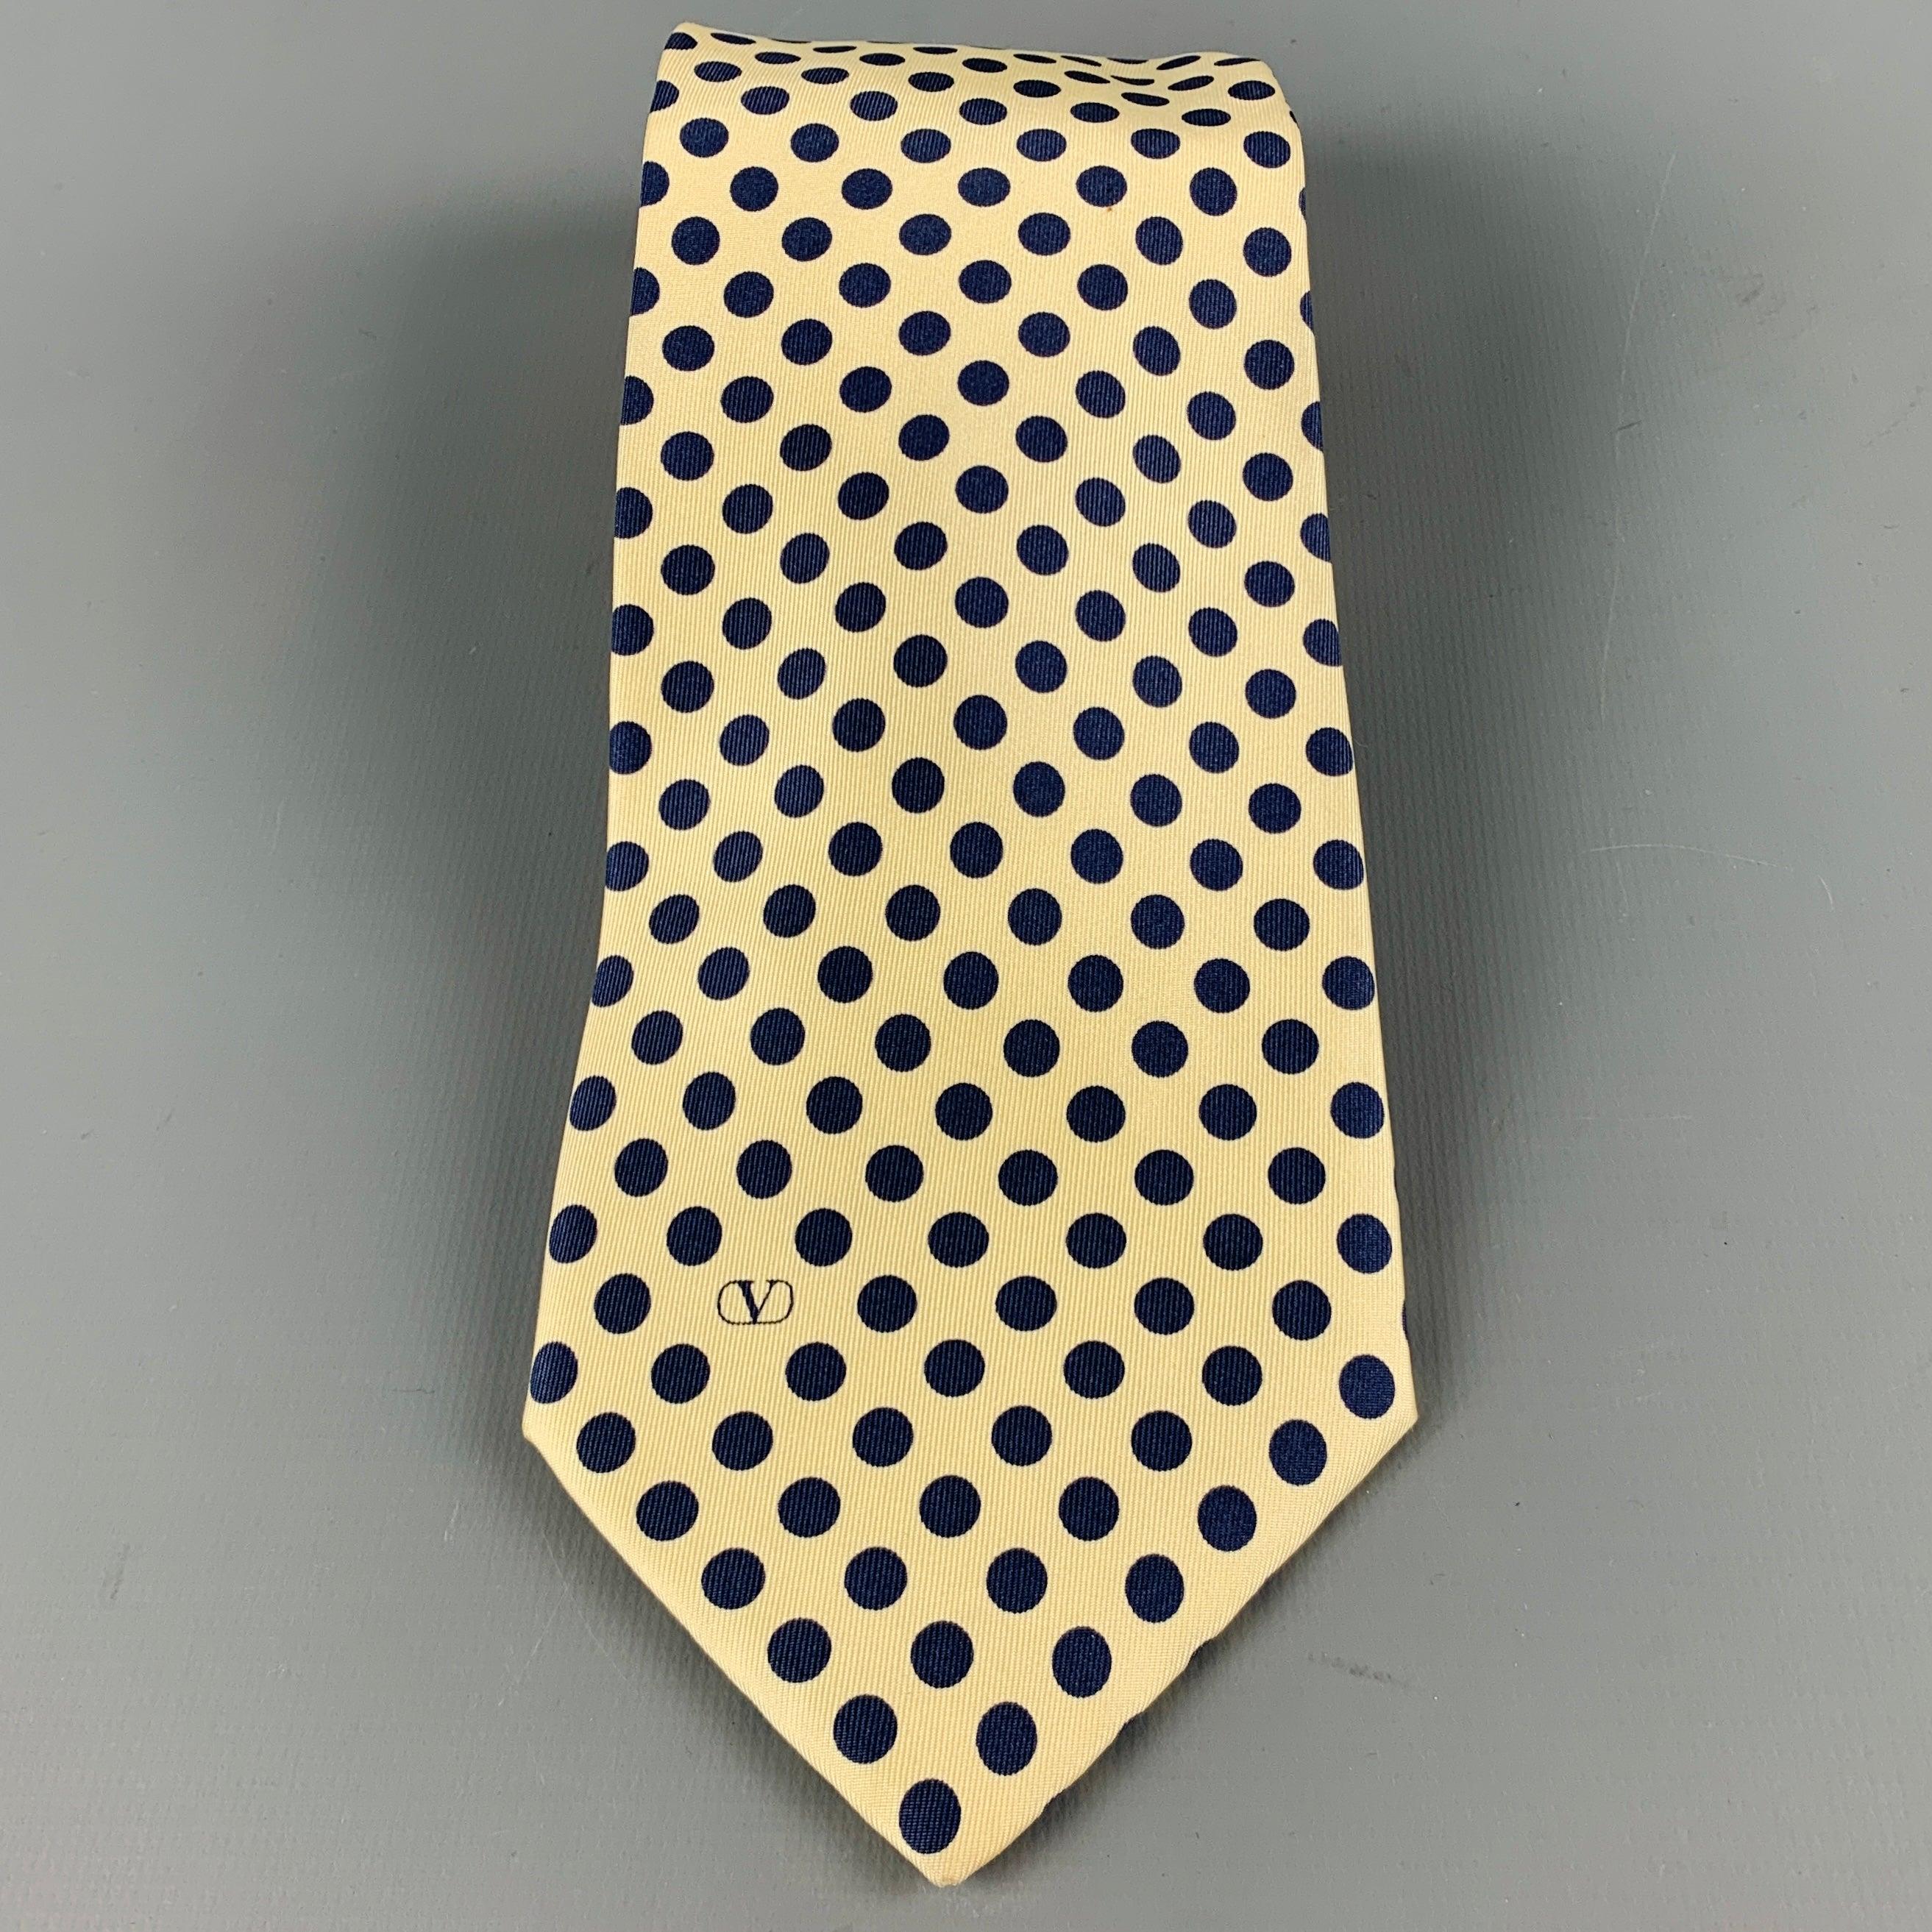 Vintage VALENTINO
necktie in a
yellow silk fabric featuring a navy dots pattern and signature Valentino monogram. Made in Italy.Very Good Pre-Owned Condition. Minor mark. 

Measurements: 
  Width: 3.75 inches Length: 58 inches 
  
  
 
Reference